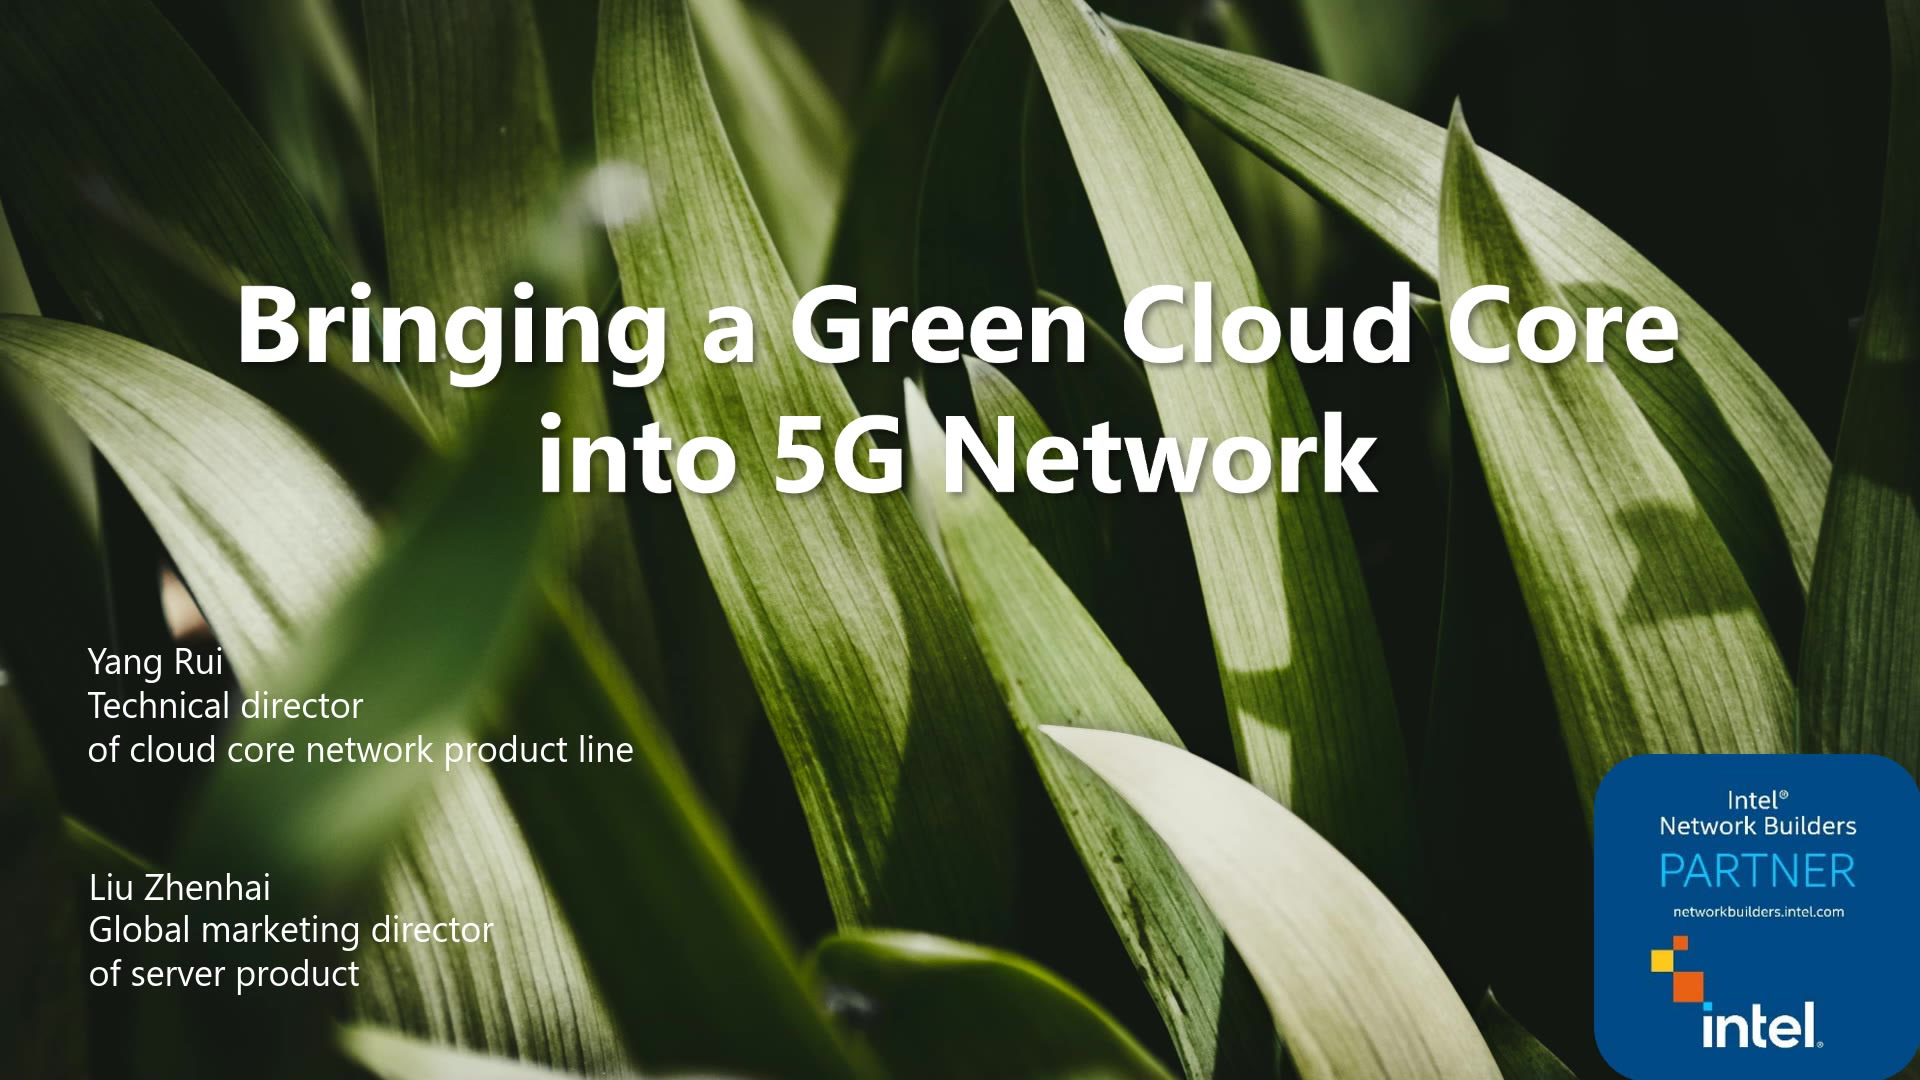 Bringing a Green Cloud Core Into 5G Networks